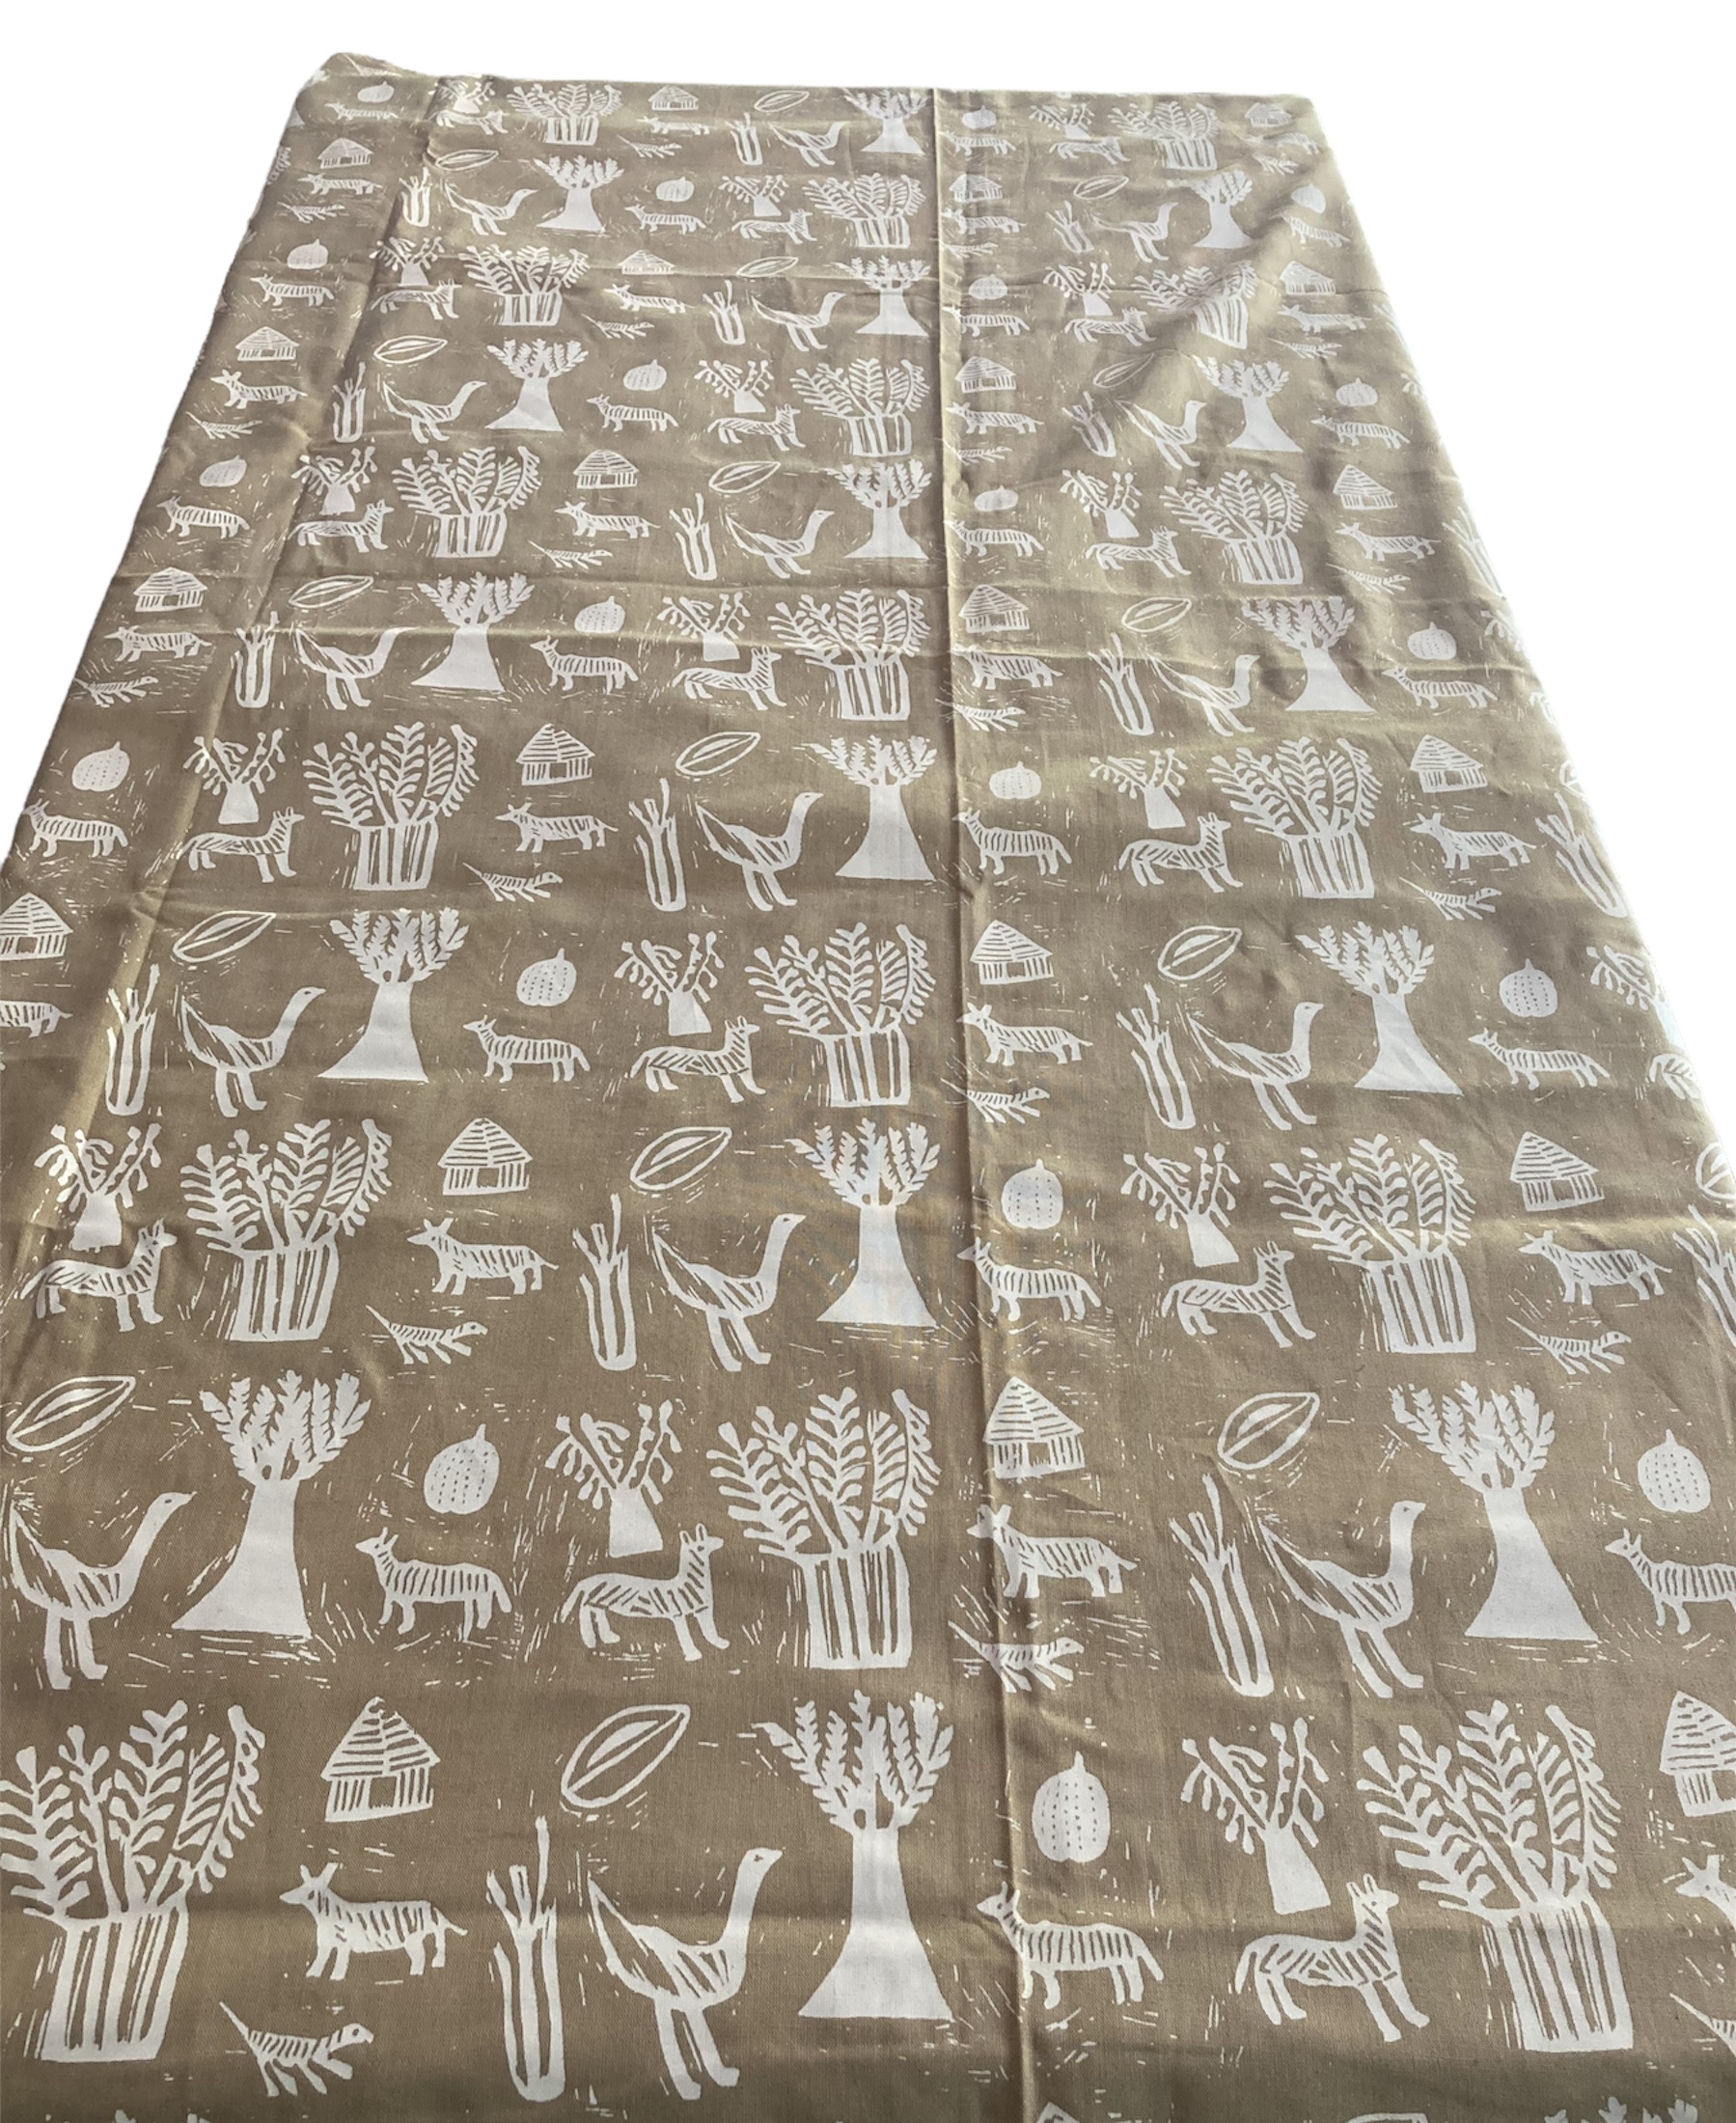 100% cotton Tablecloth approx. 59\" x 57\" from Namibia - # b16t